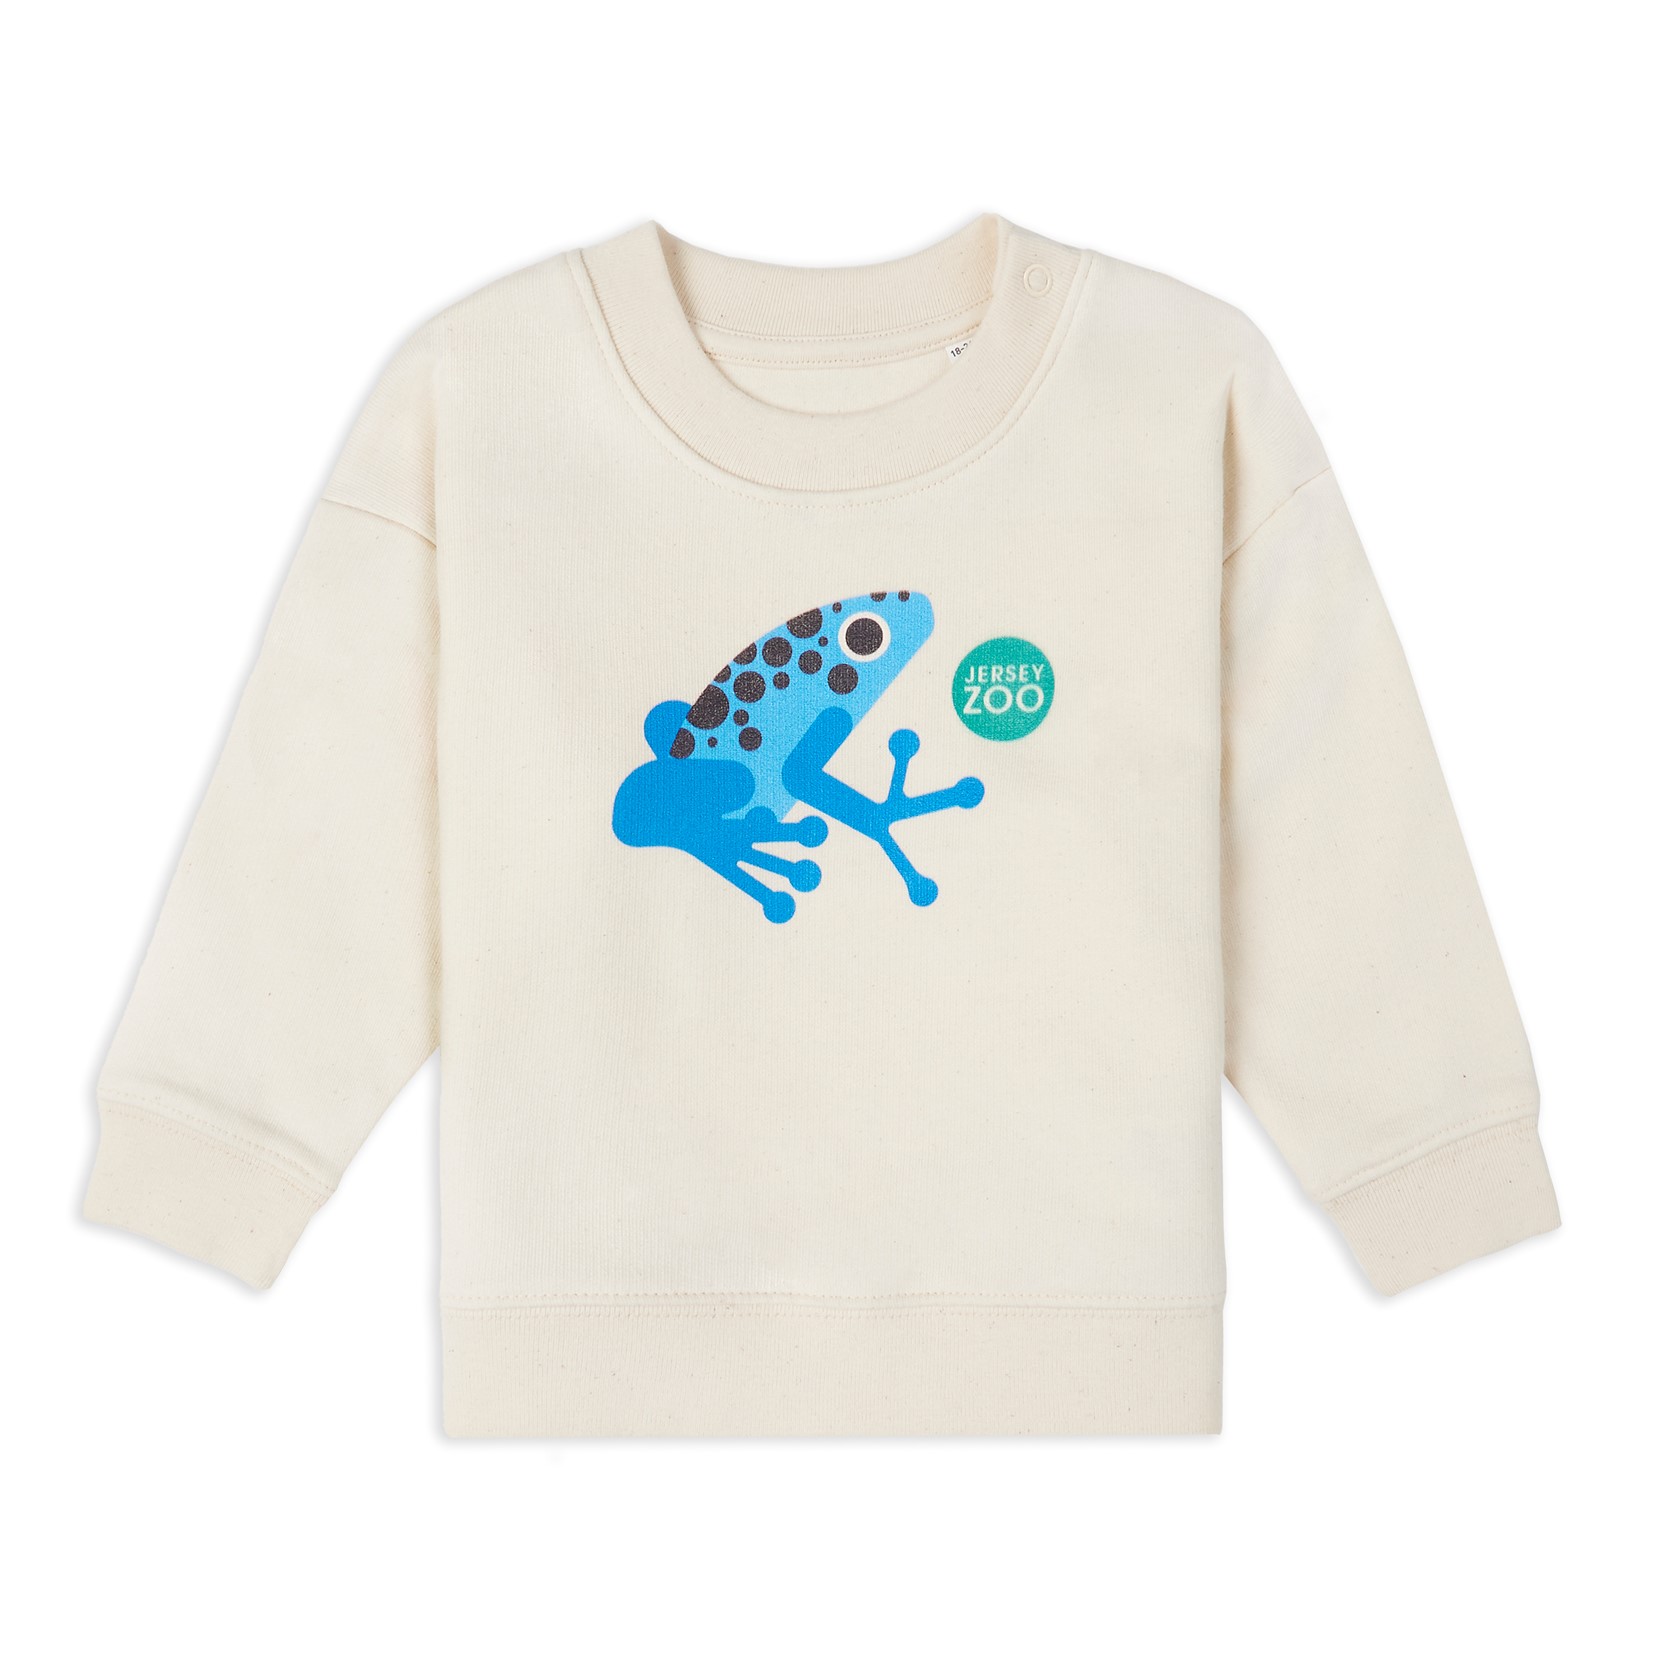 Jersey Zoo Baby Frog Sweater